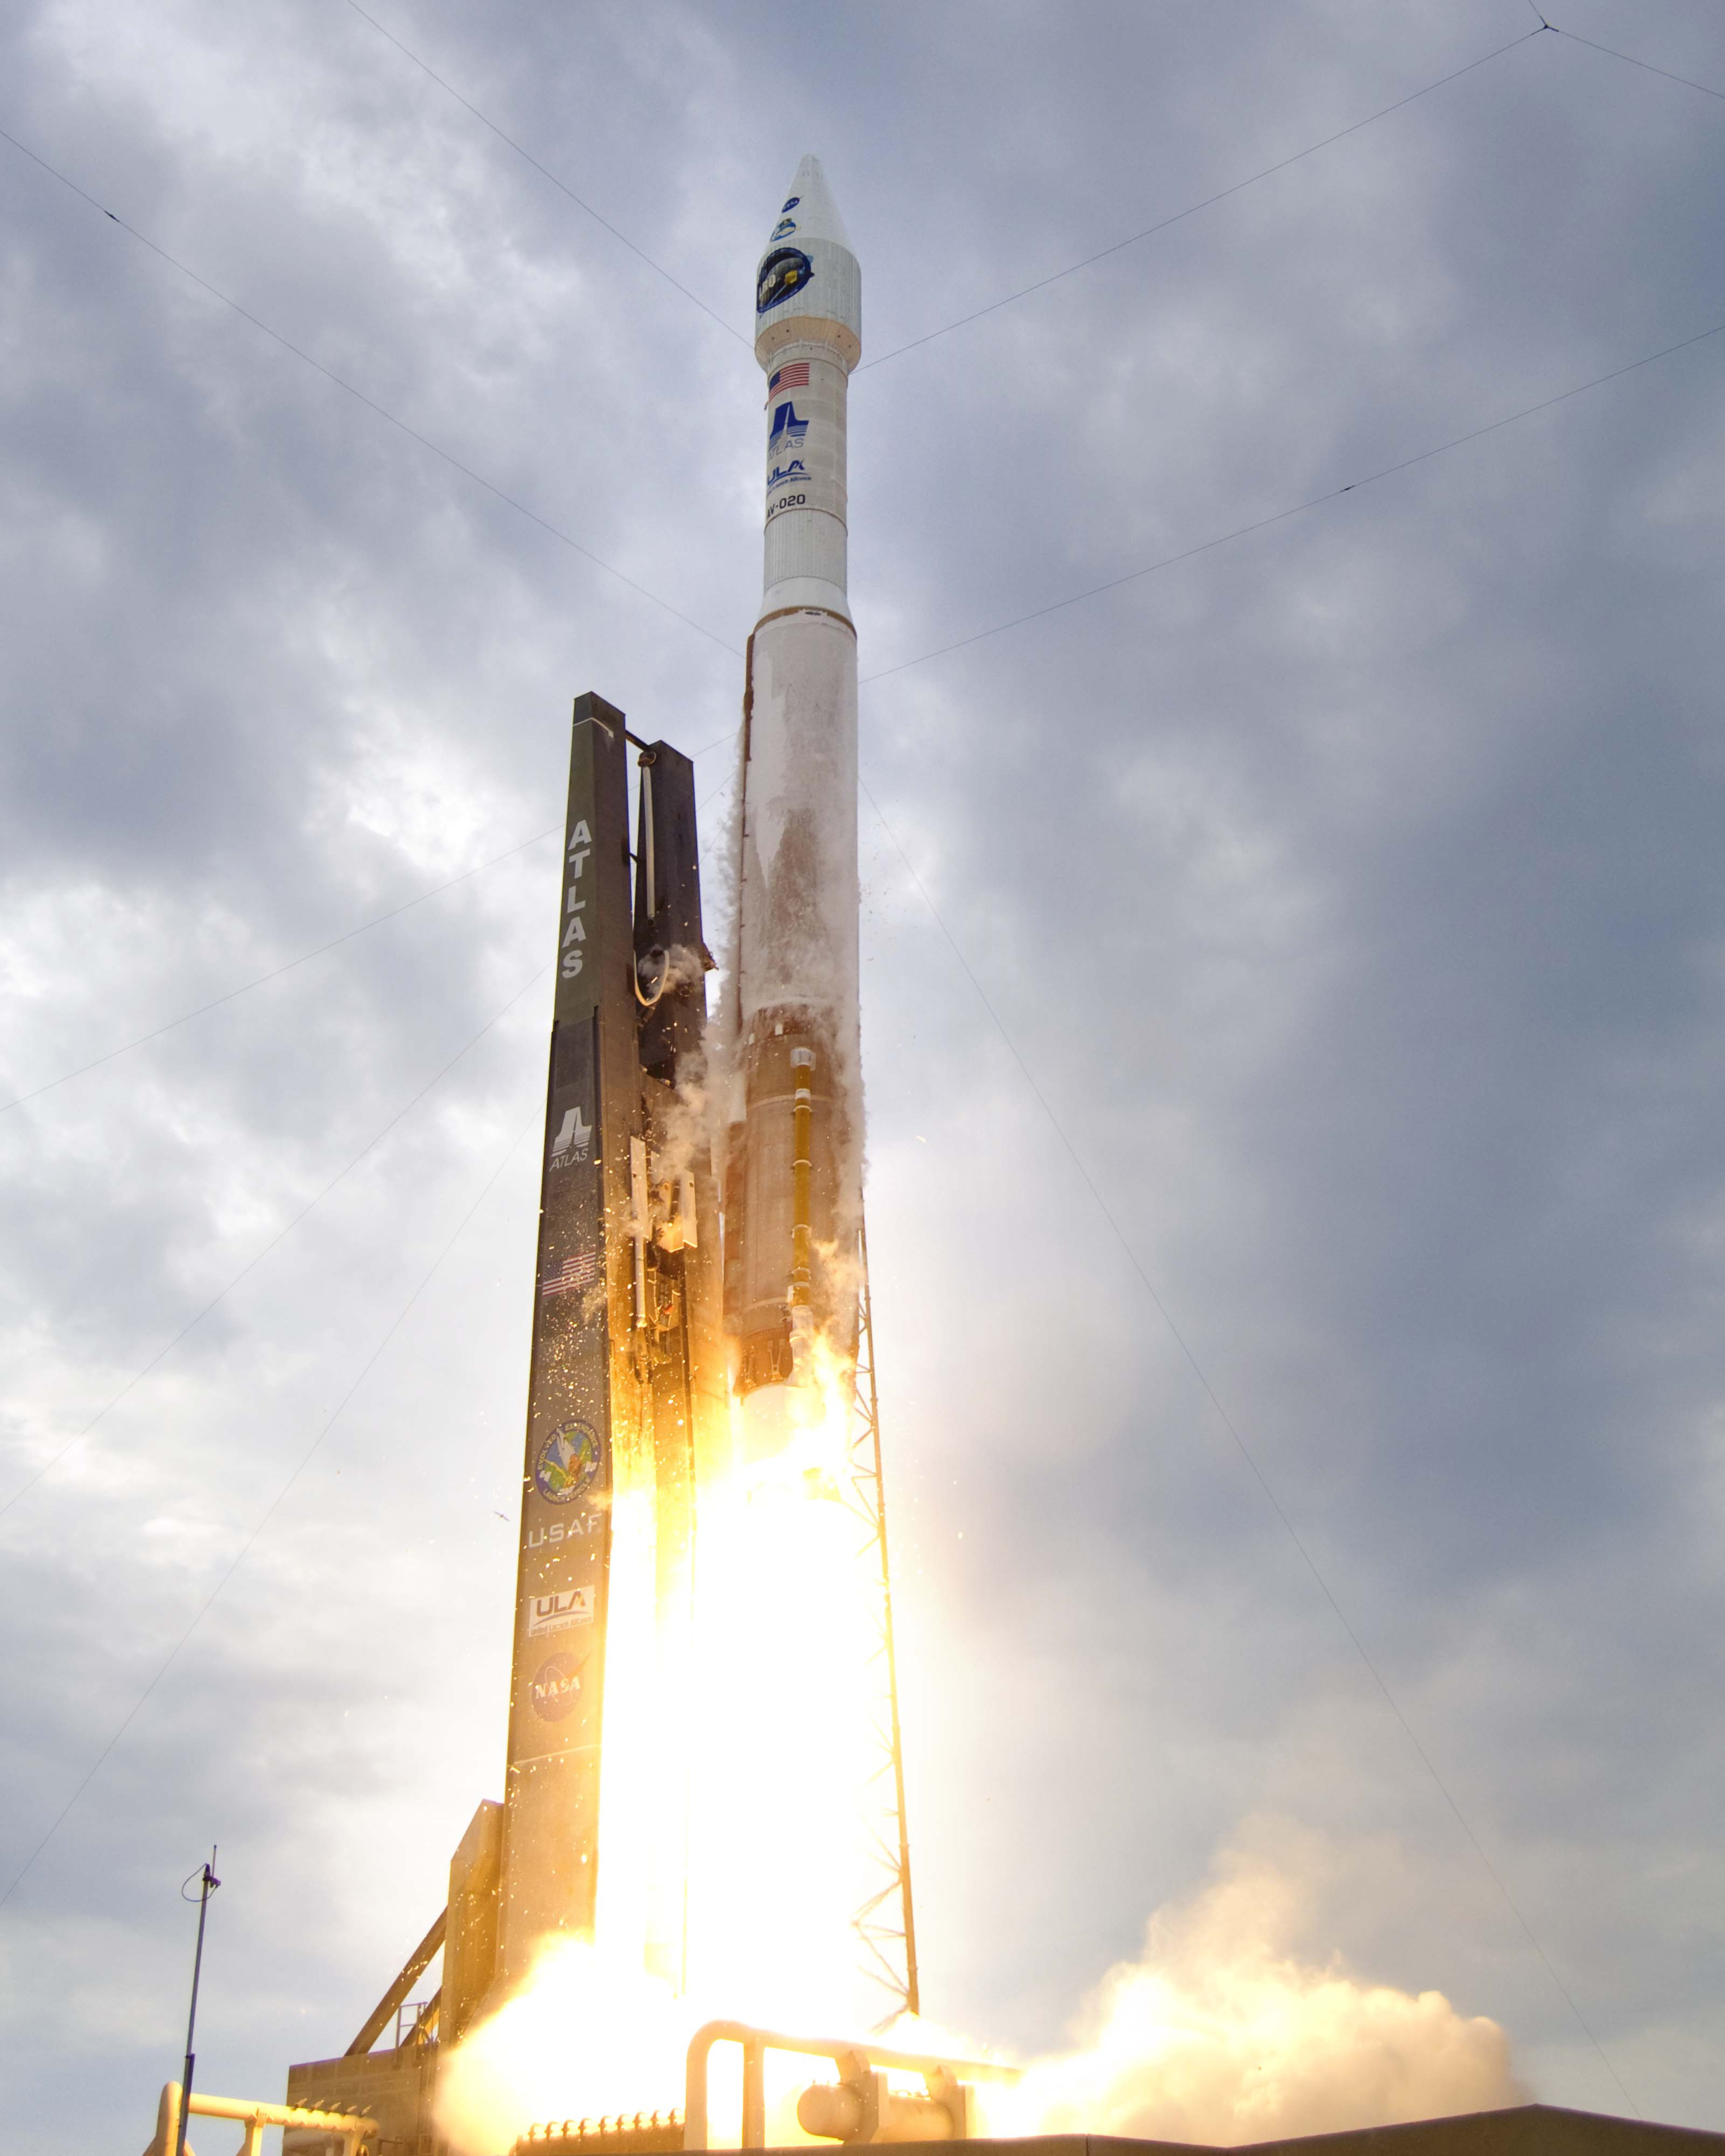 Atlas 5 Rocket Launches to the Moon